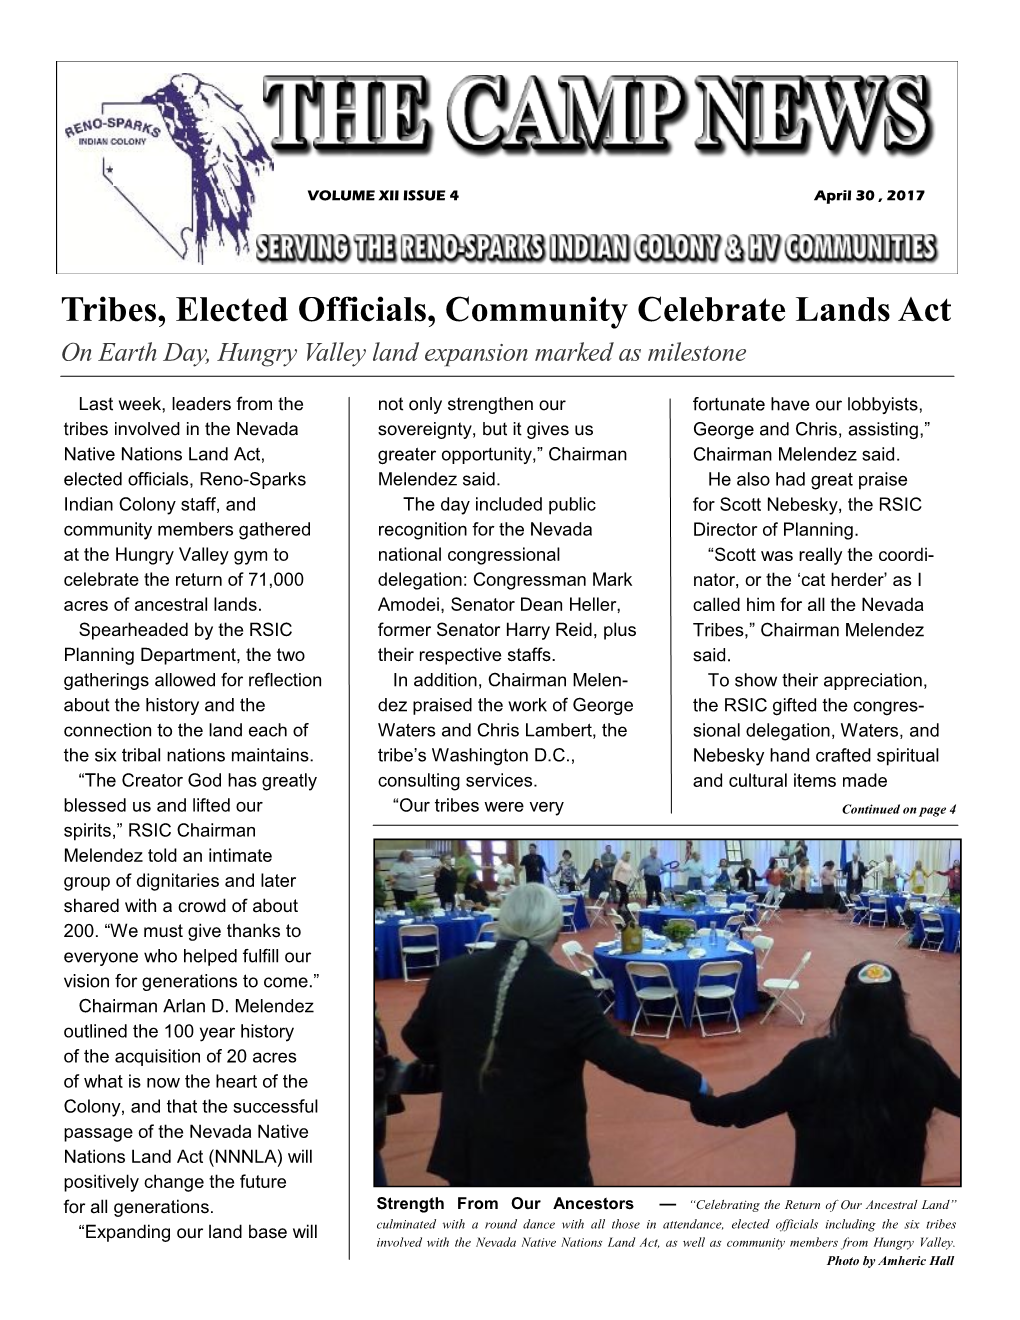 Tribes, Elected Officials, Community Celebrate Lands Act